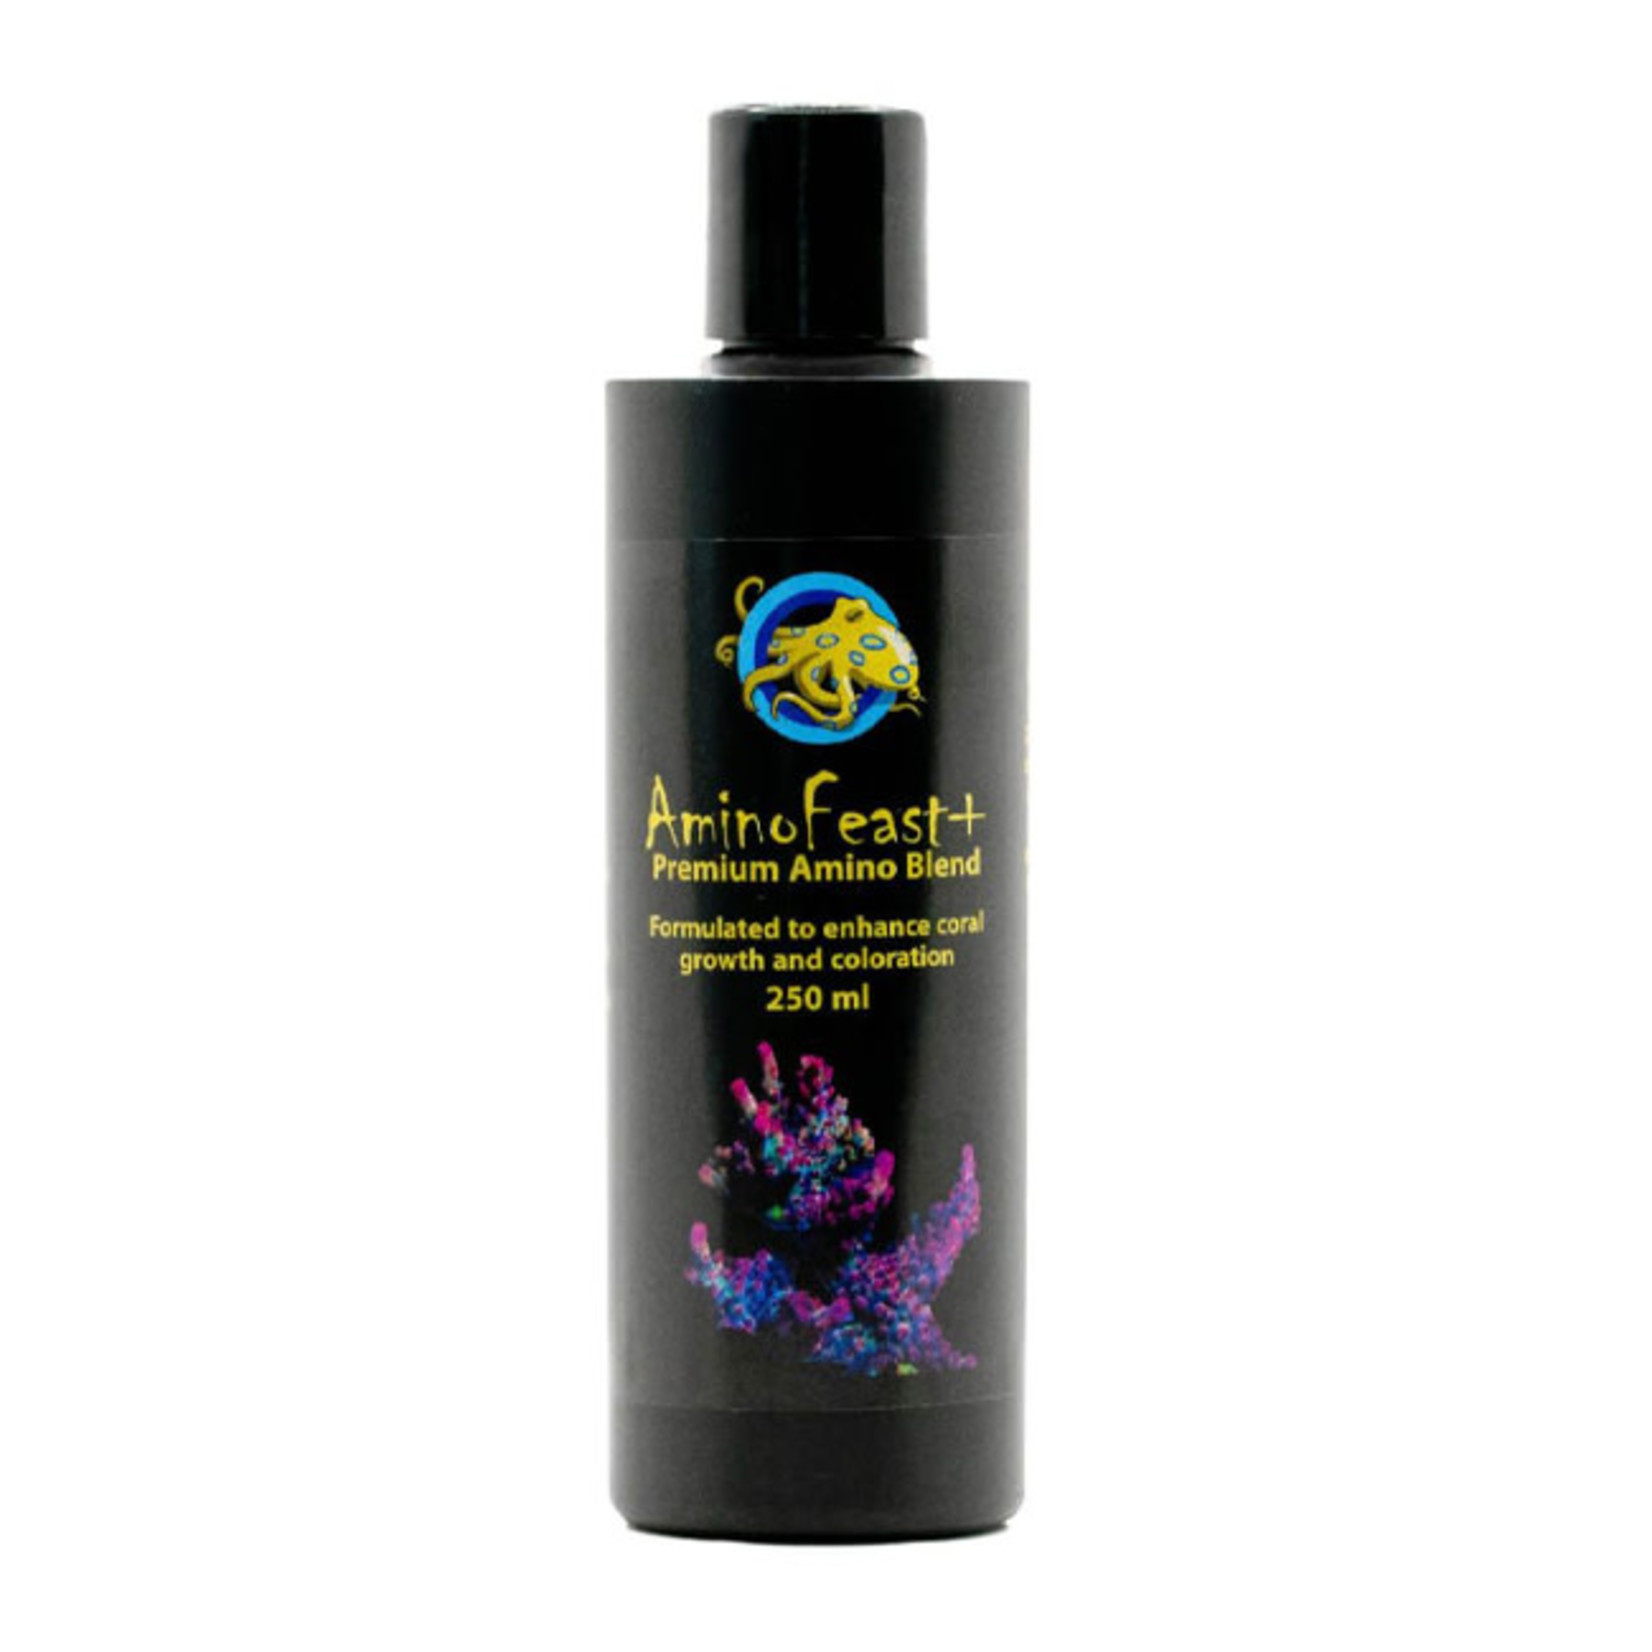 Willow's Reef Willow's Reef Amino Feast+ 250ml / 8oz